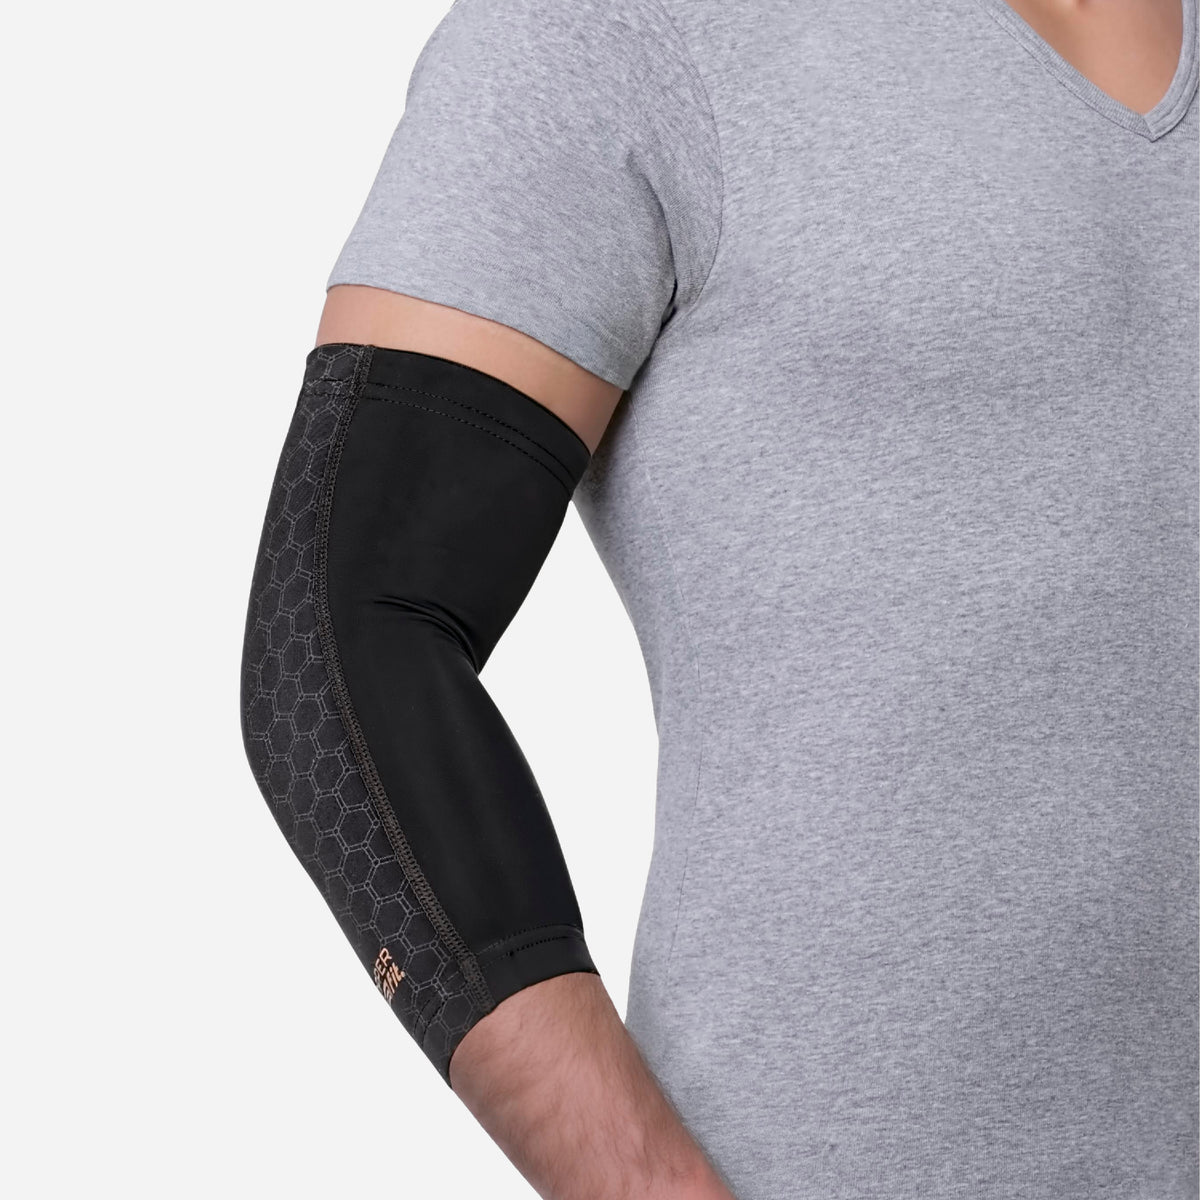 Freedom Elbow Compression Sleeves - Copper Fit